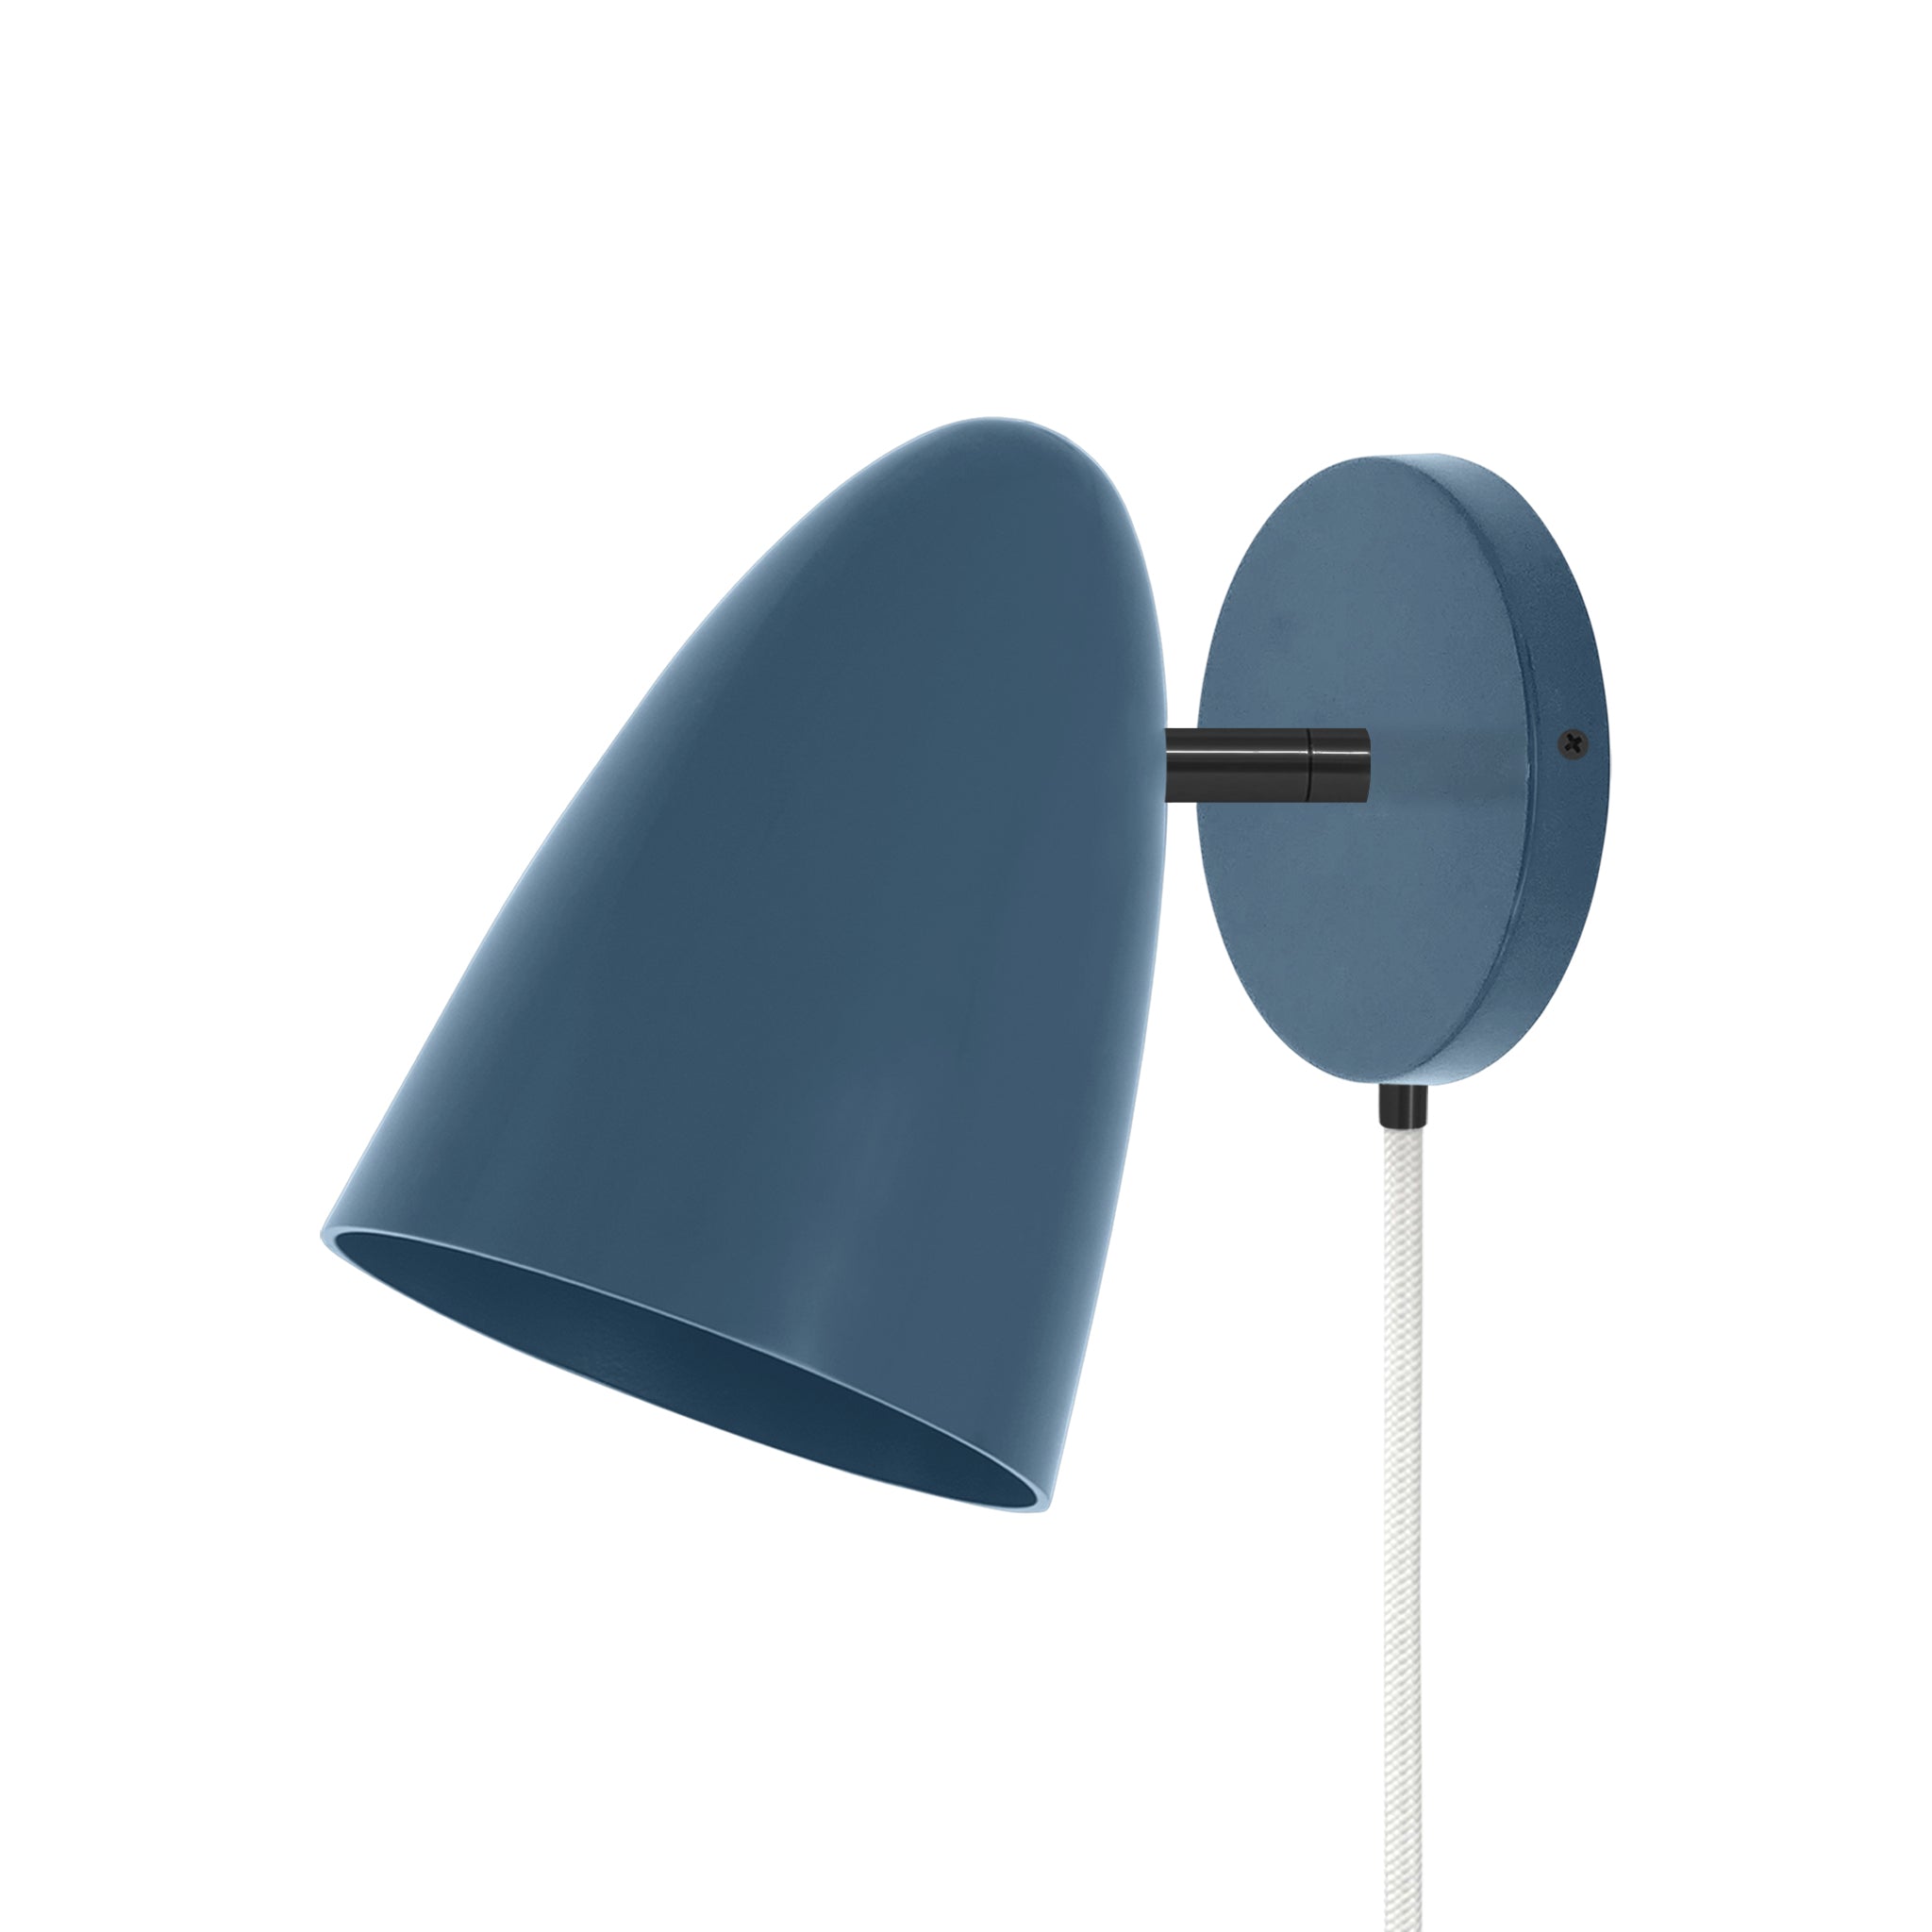 Black and slate blue color Boom plug-in sconce no arm Dutton Brown lighting